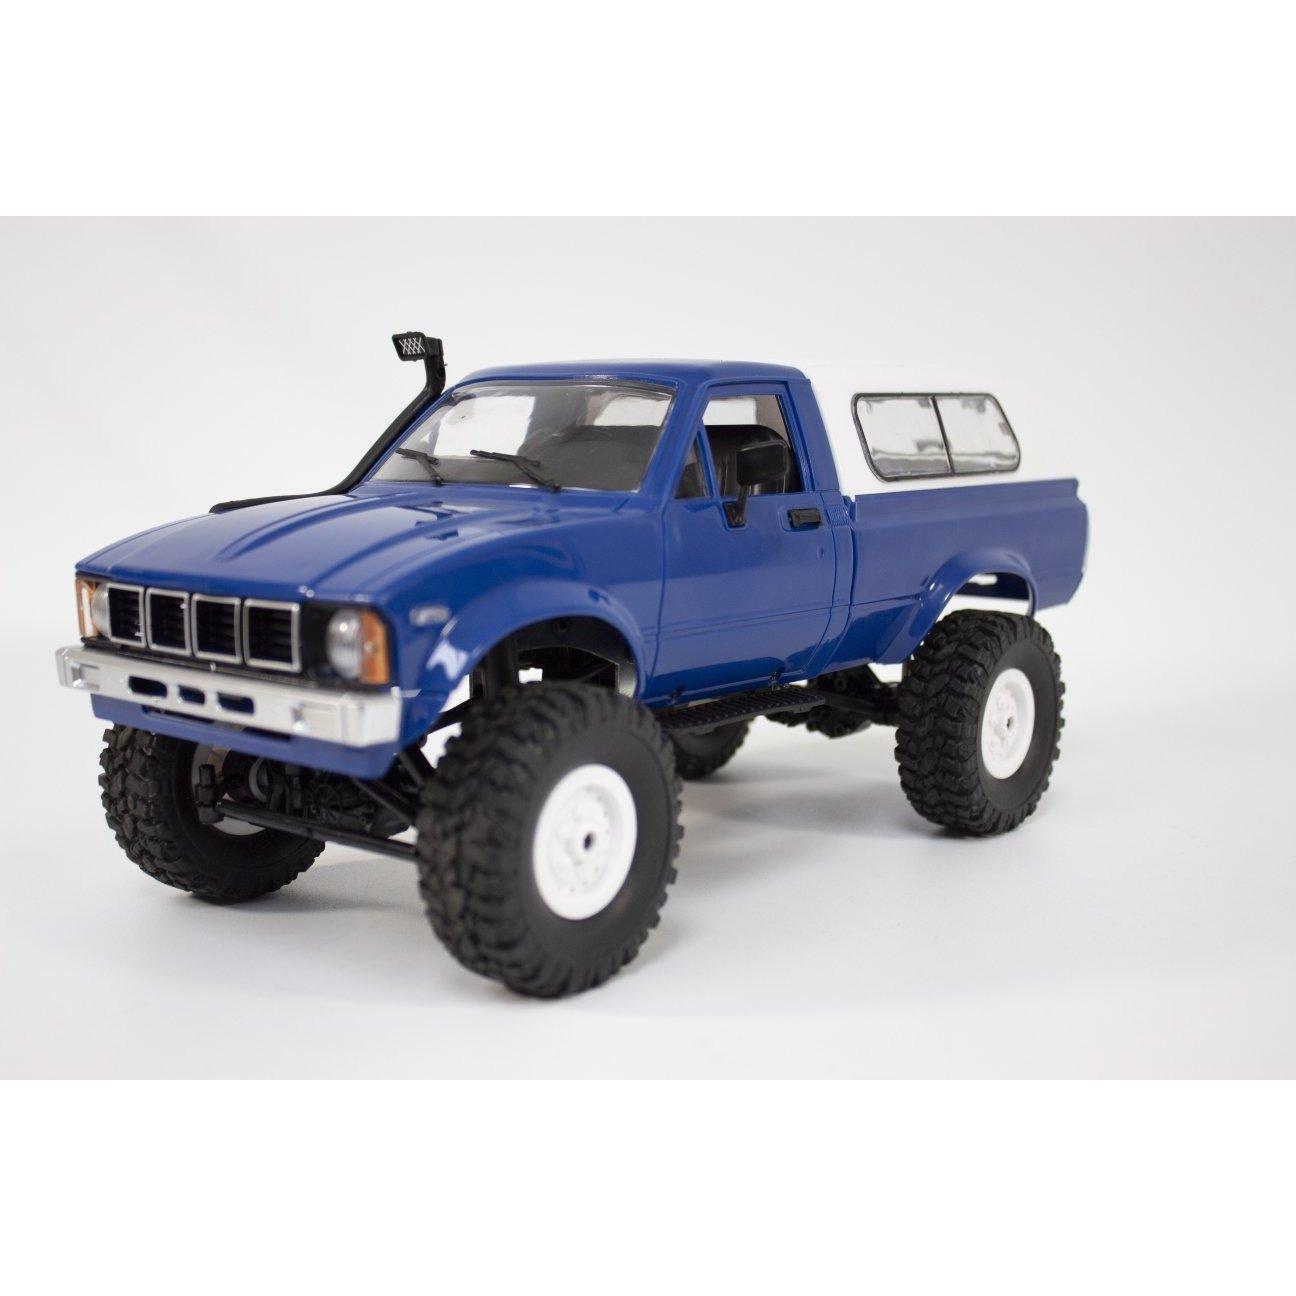 Hilux 4x4 1:16th Scale KIT RC Truck